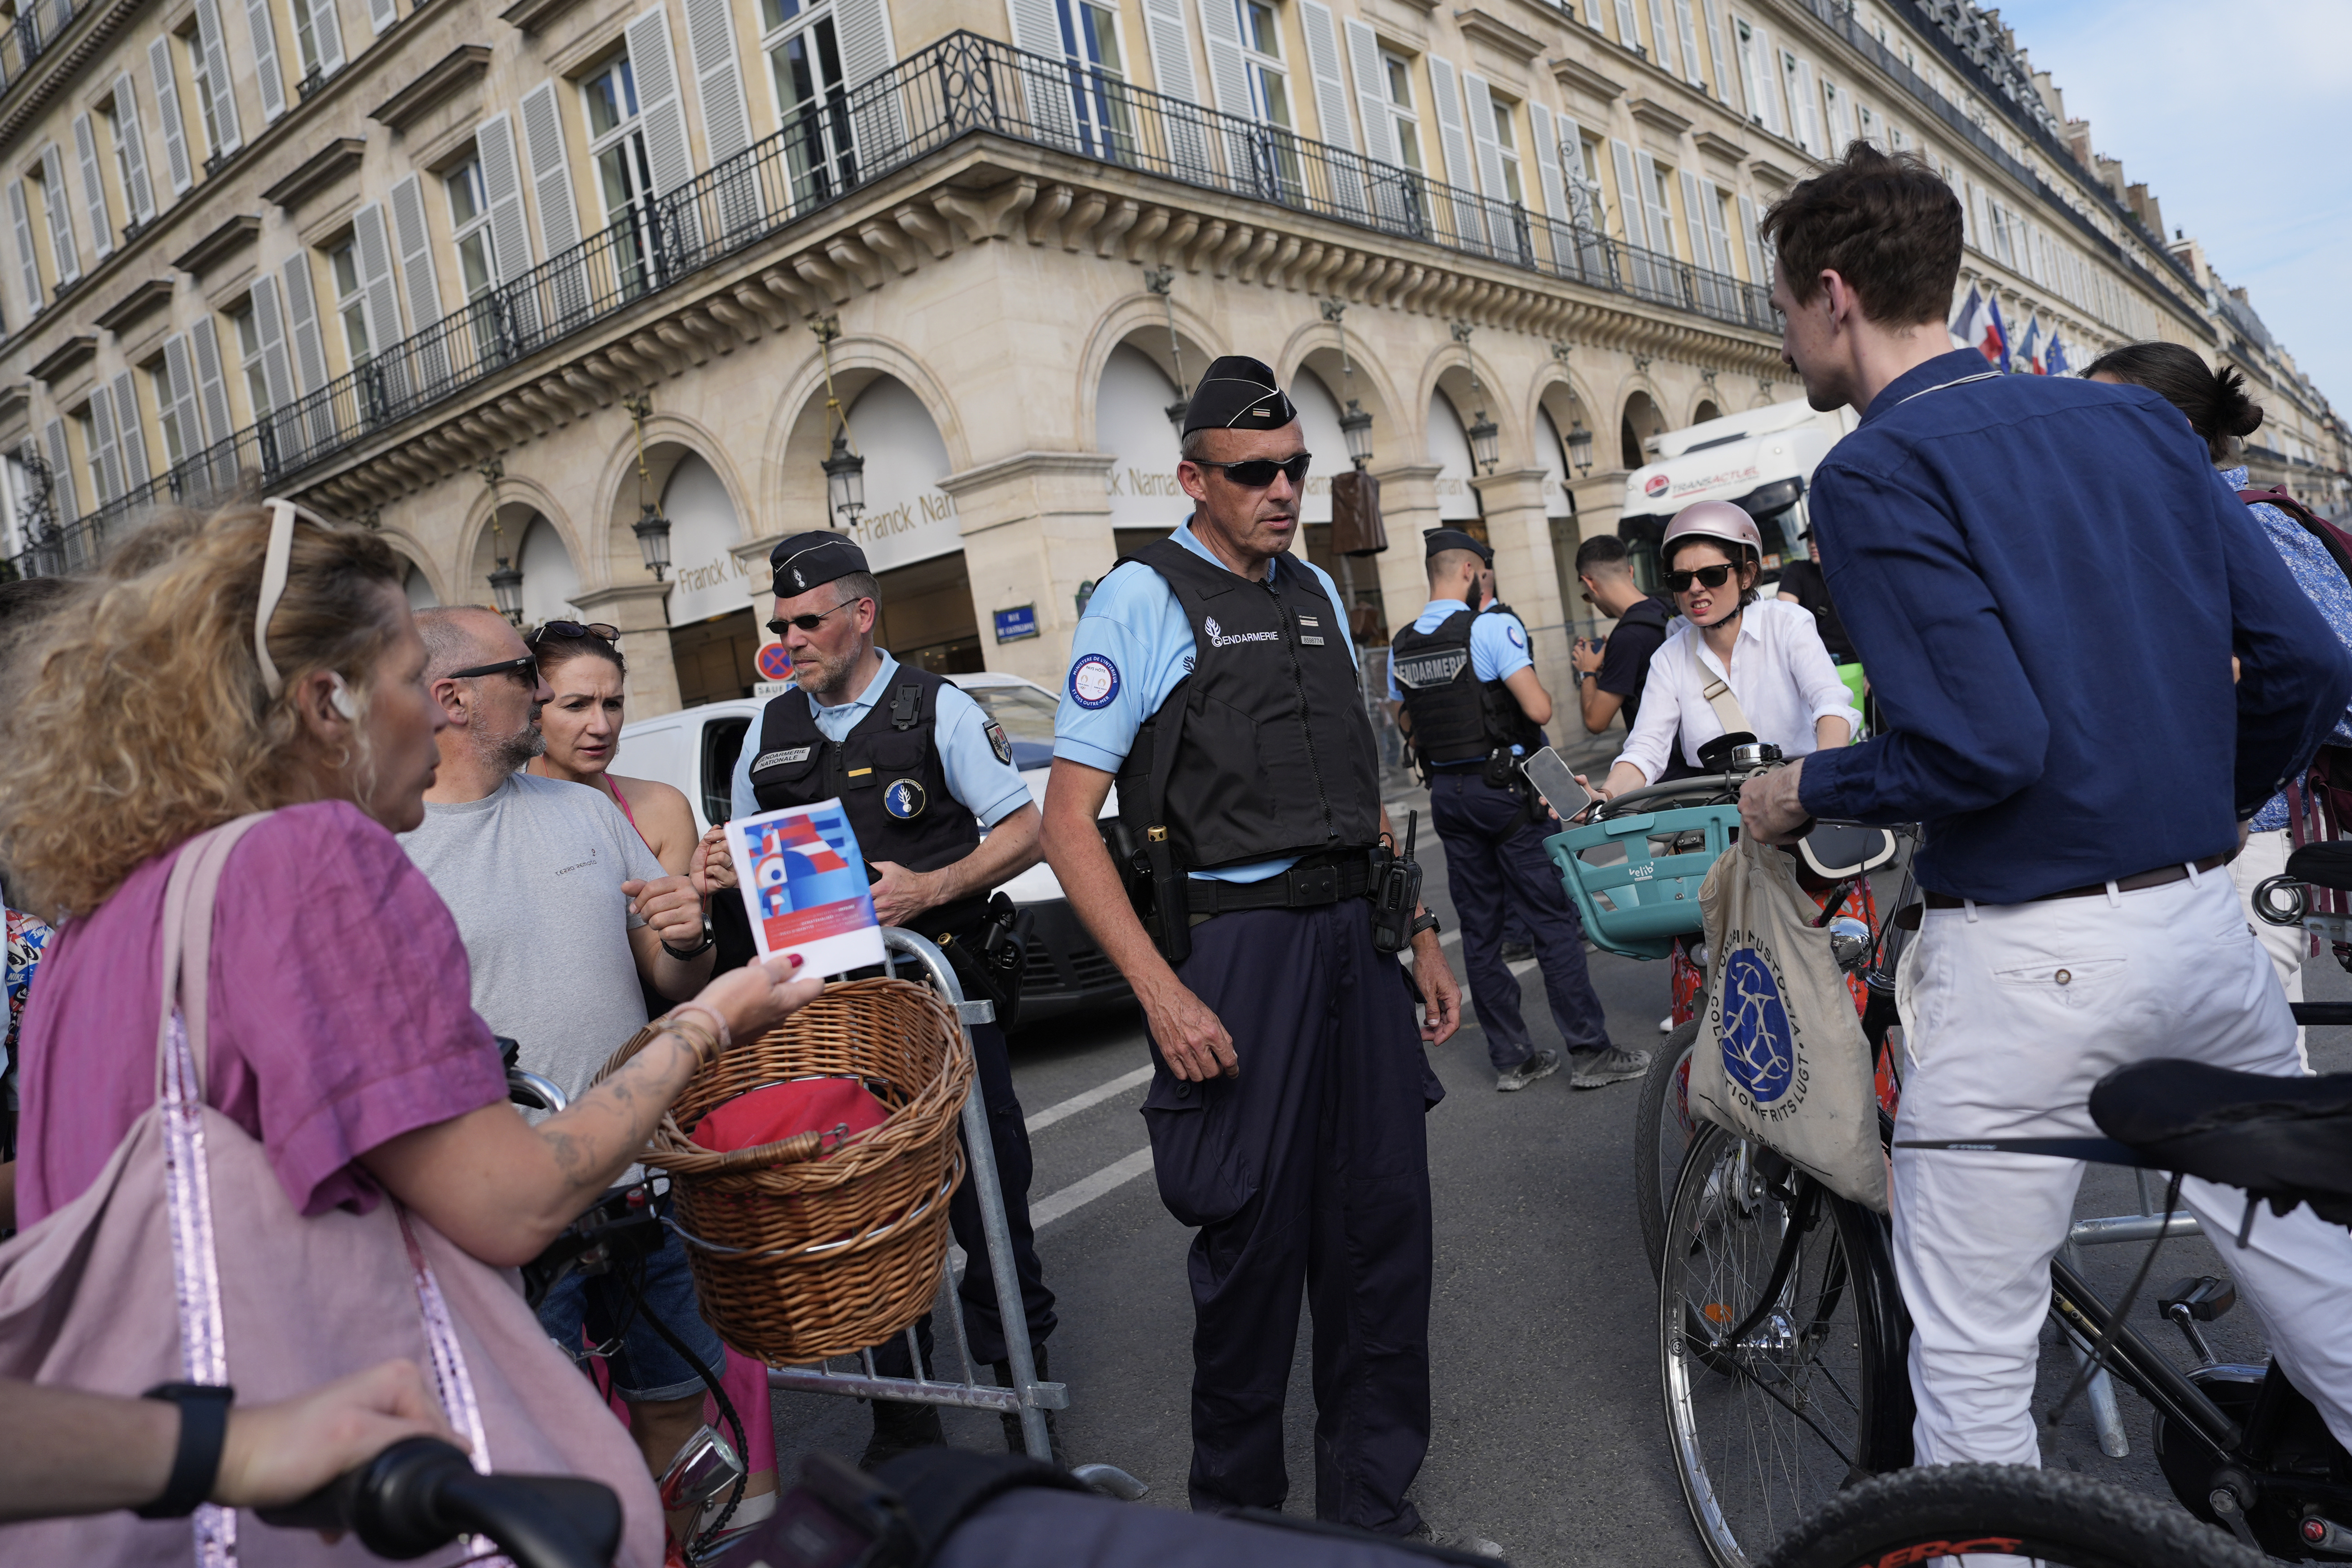 Police officers check authorizations at a check point Thursday, July 18, 2024 in Paris. A special kind of iron curtain came down across central Paris on Thursday, with the beginning of an Olympic anti-terrorism perimeter along the banks of the River Seine sealing off a kilometers-long (miles-long) area to Parisians and tourists who hadn't applied in advance for a pass. (AP Photo/David Goldman)